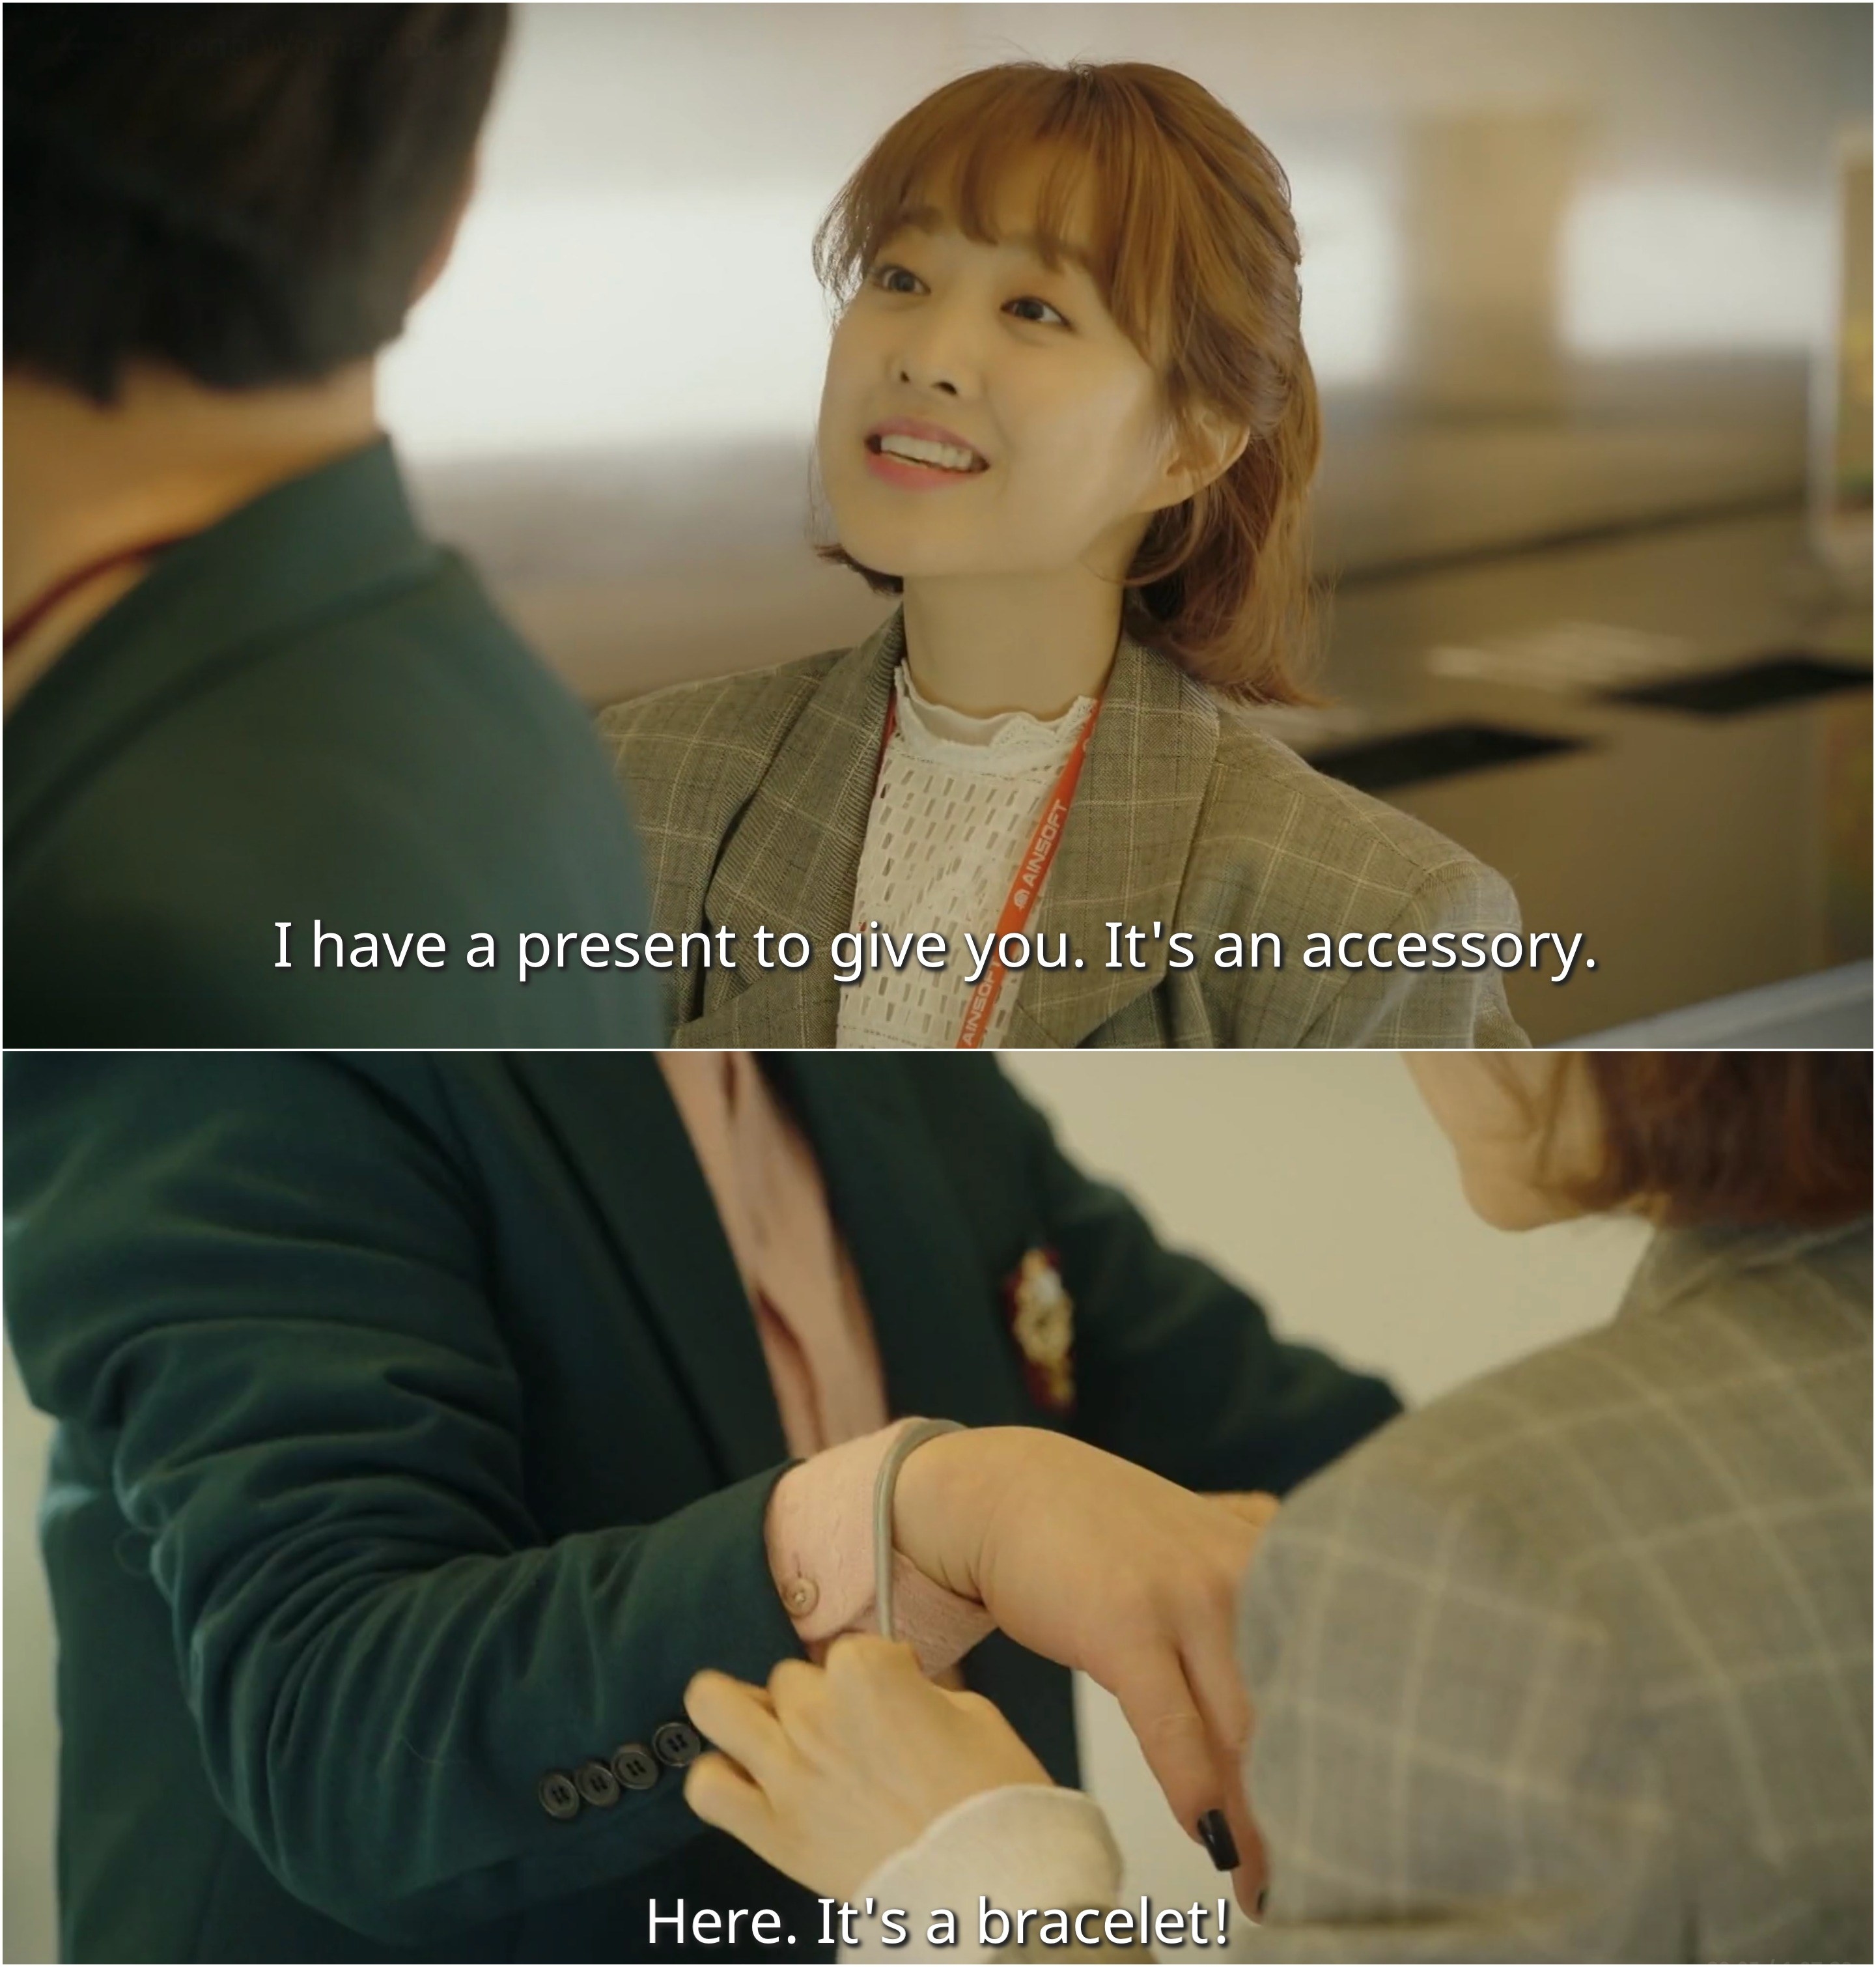 Bong-soon takes a chopstick and forms it into a bracelet for her mean co-worker to wear